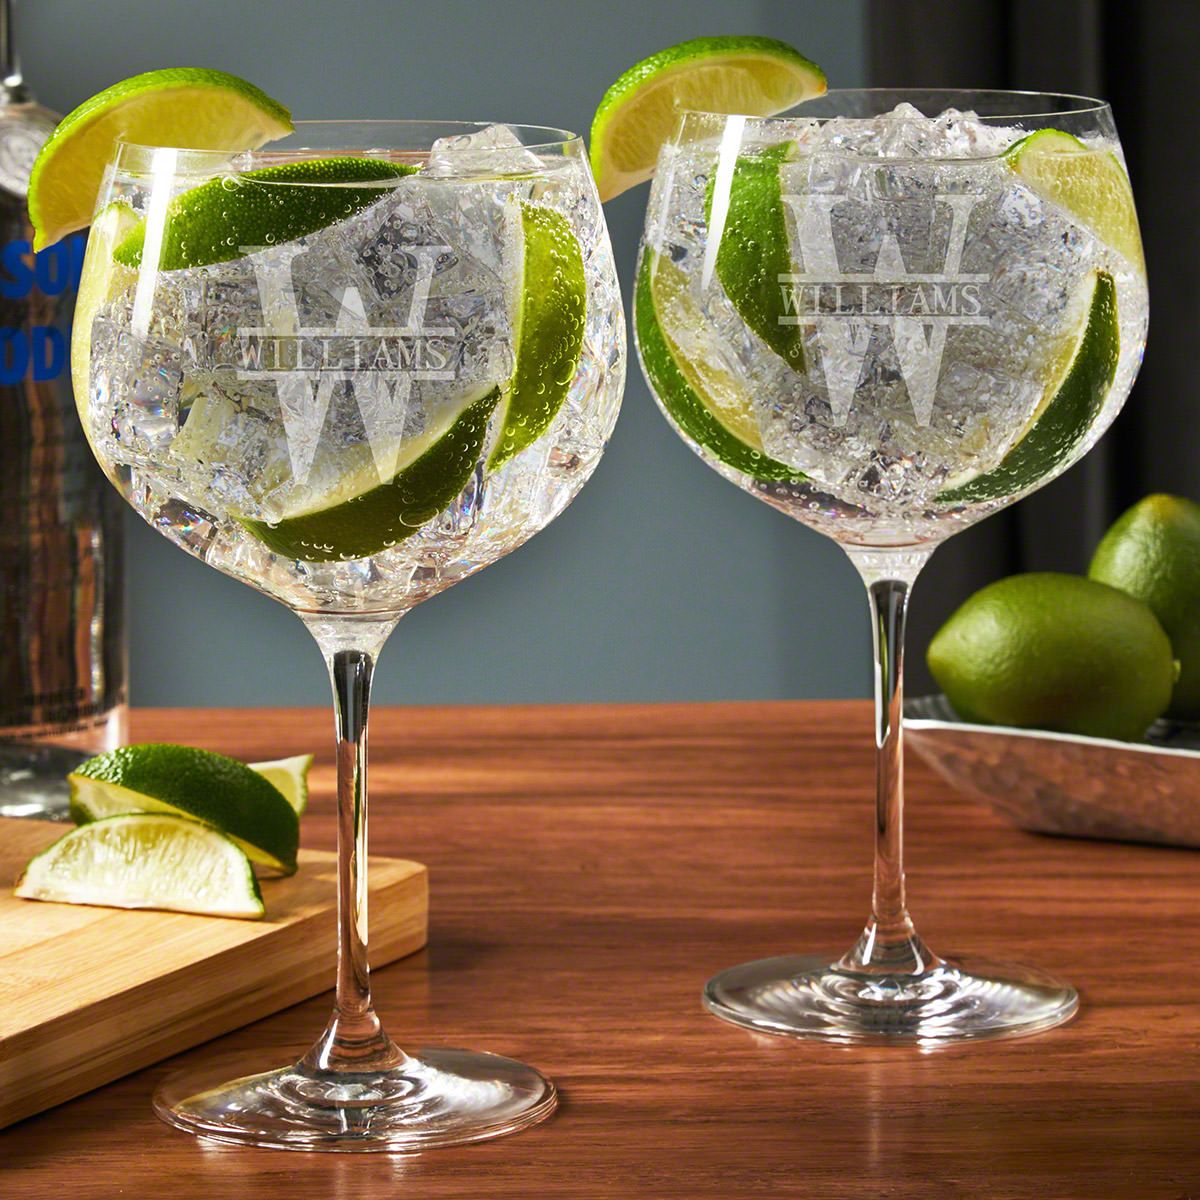 Gin and Tonic Glass